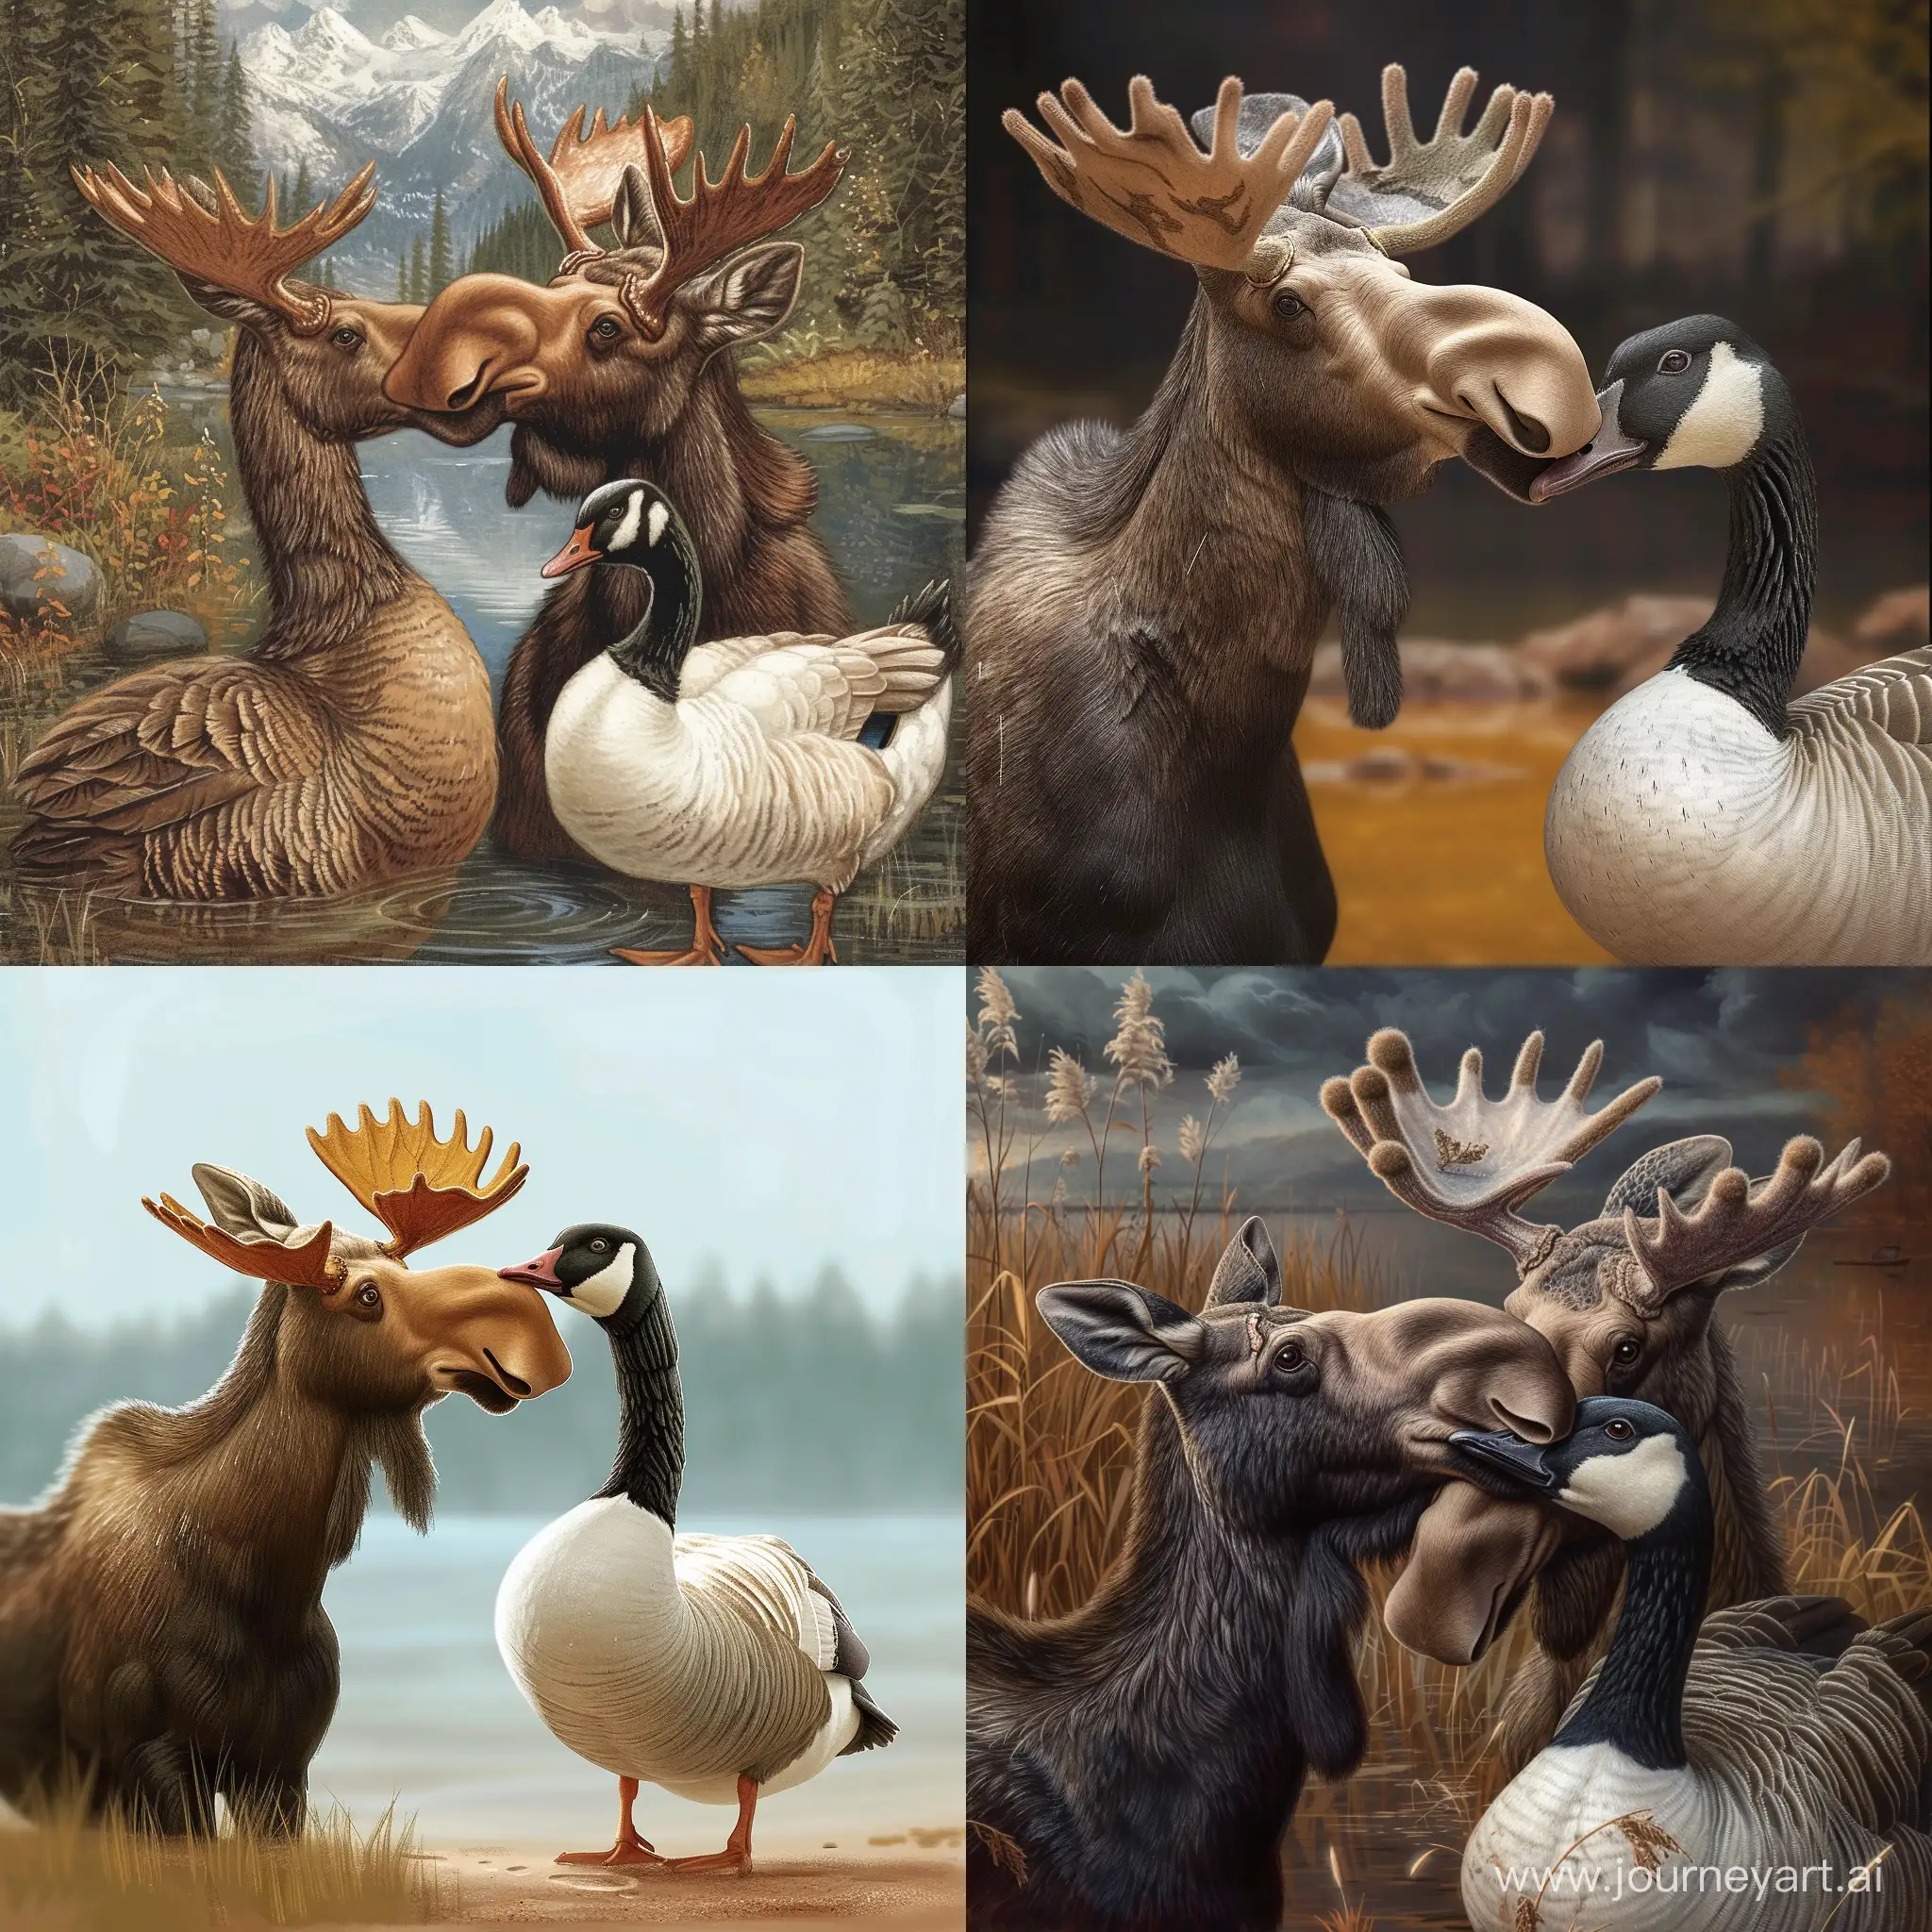 Affectionate-Moose-Kissing-a-Goose-in-a-Heartwarming-Moment